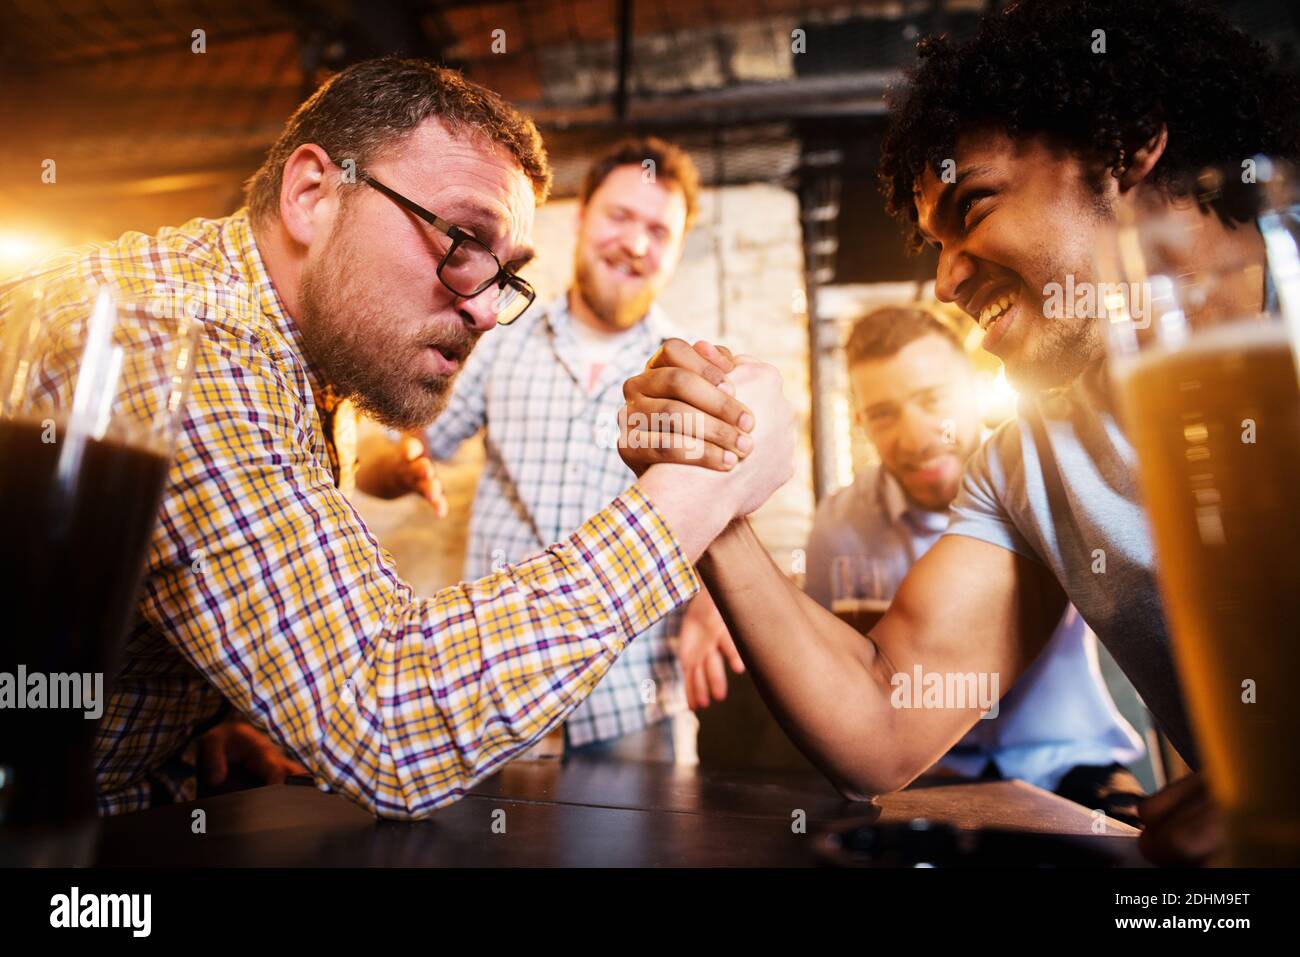 Exhausted mixed-race male friends having arm wrestling challenge at the local bar while other supporting. Stock Photo